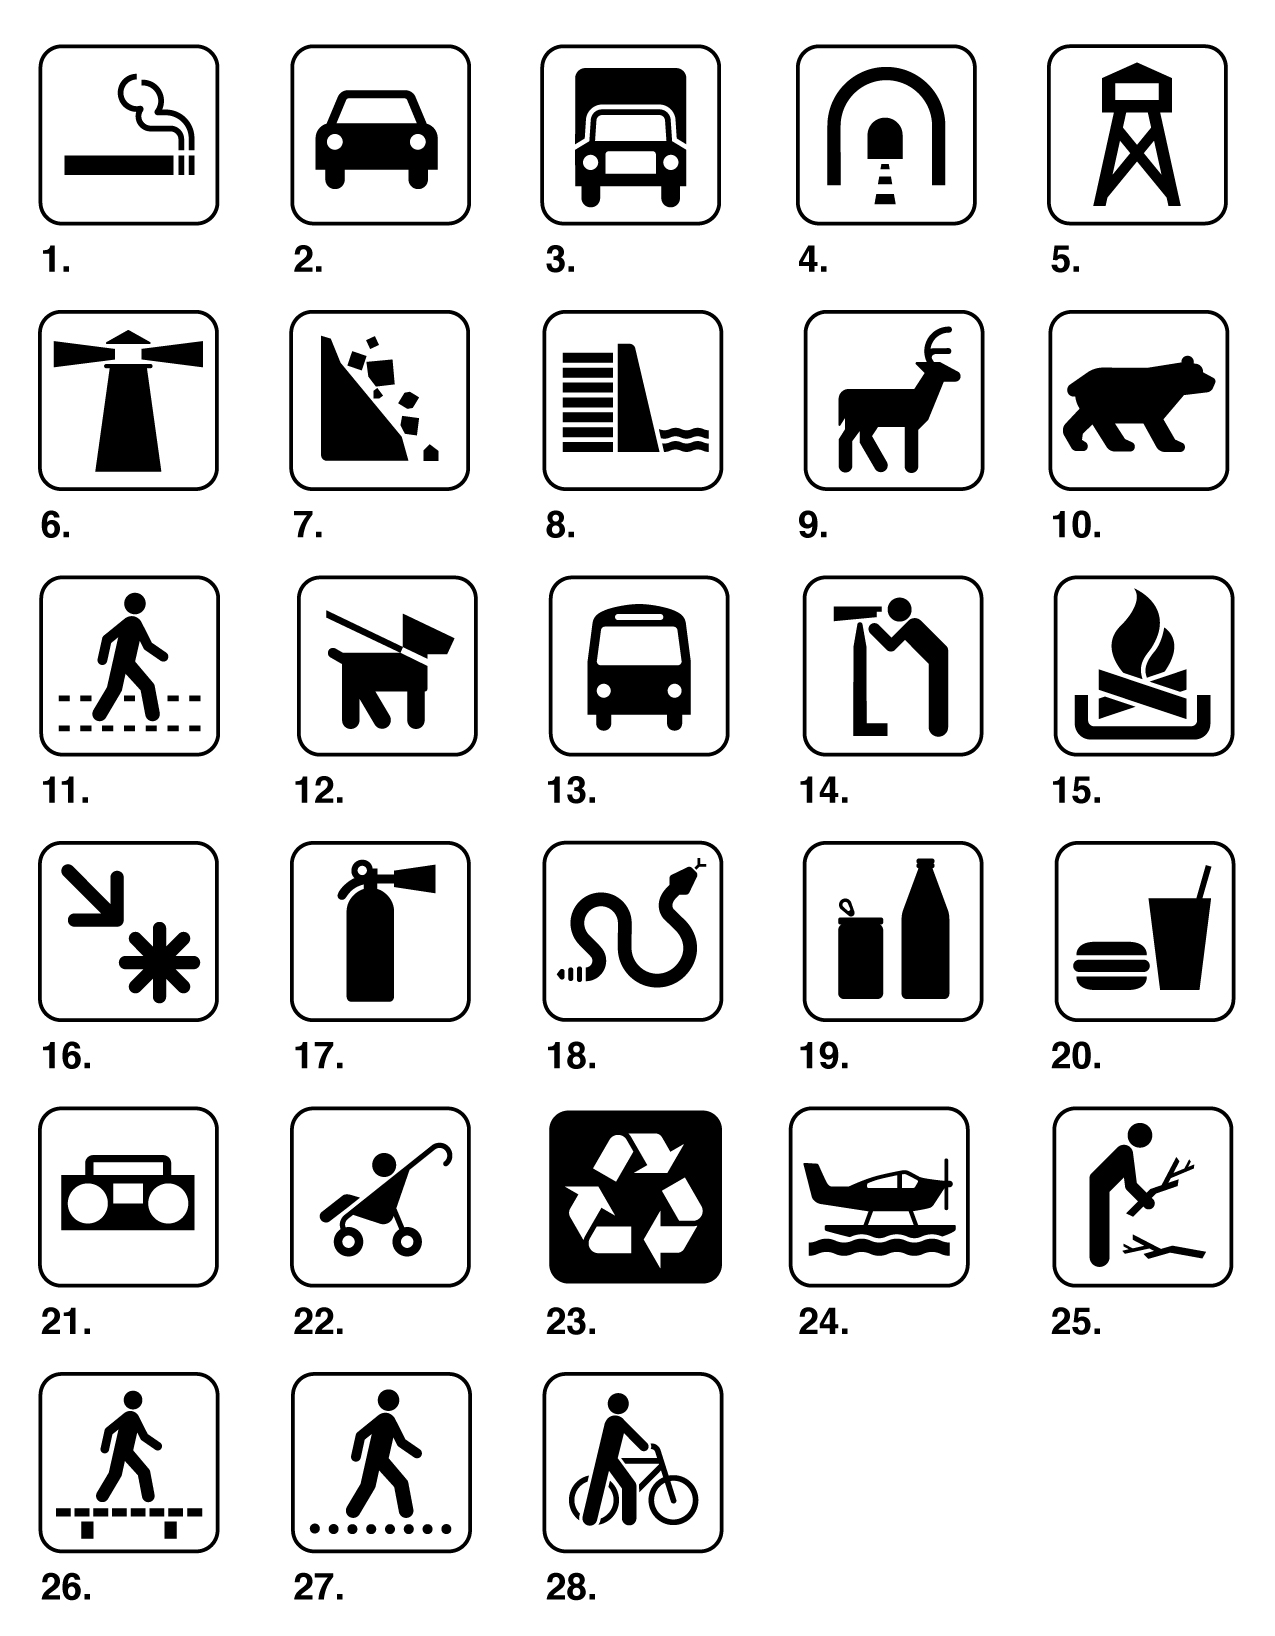 Signs Symbols Symbols And Meanings Symbols Pictogram